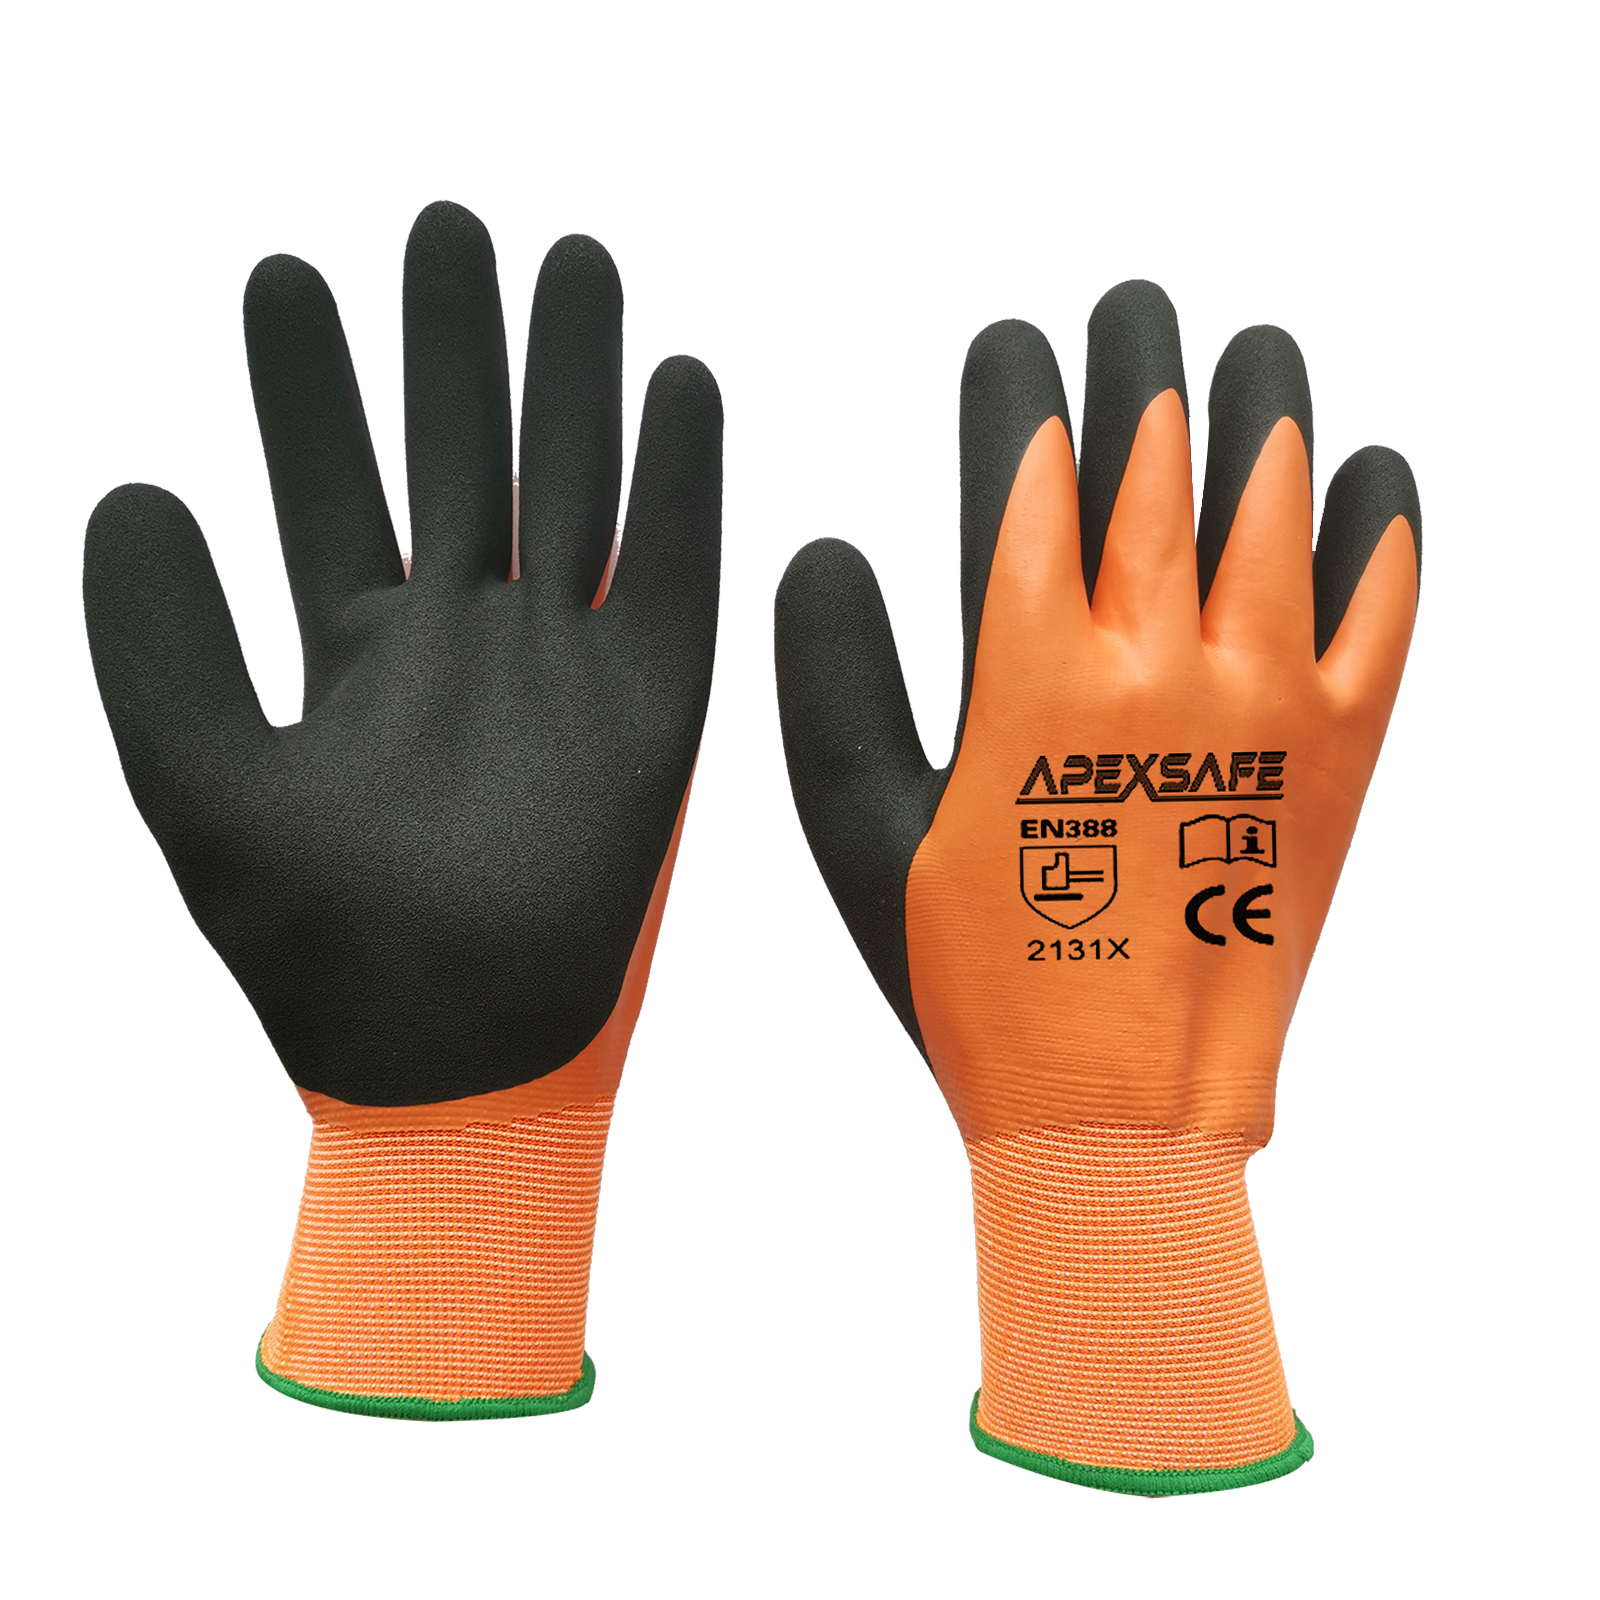 Waterproof Double-Coated/Dipped Natural Latex Rubber Work Gloves 15-Gauge Seamless Nylon Featured Image